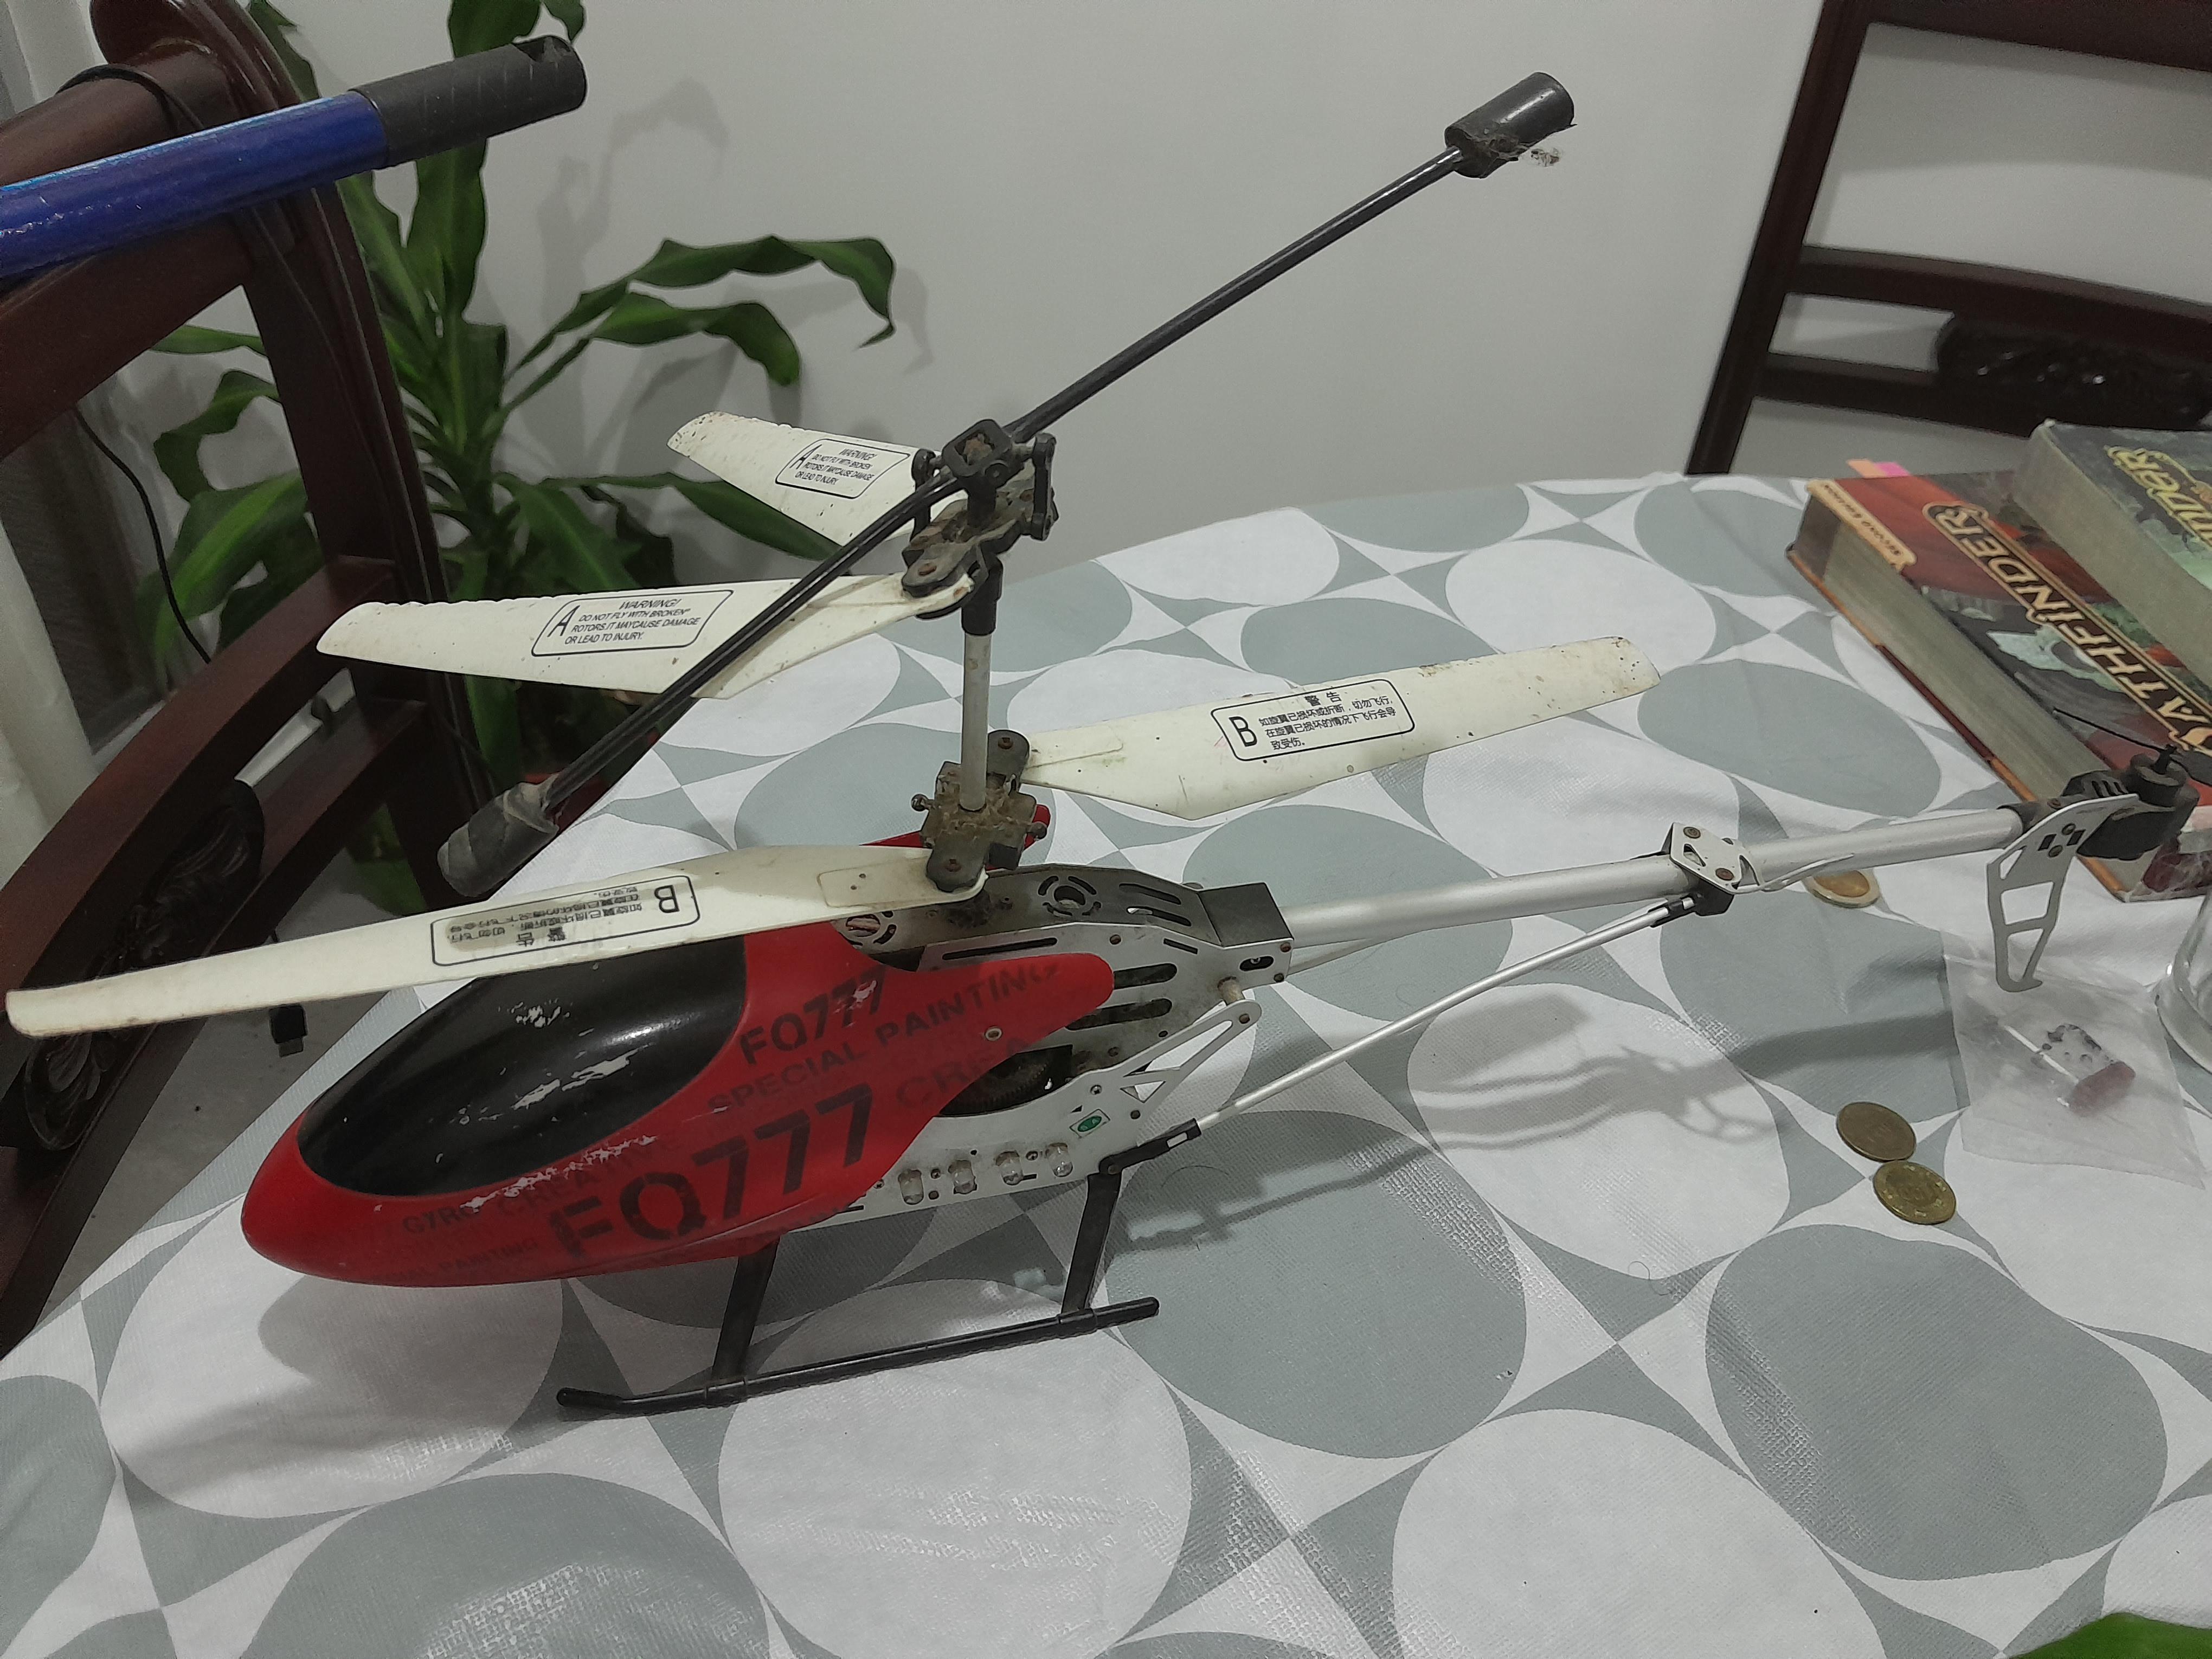 Old Rc Helicopter: Continuing the Legacy: The Enduring Appeal of Old RC Helicopters